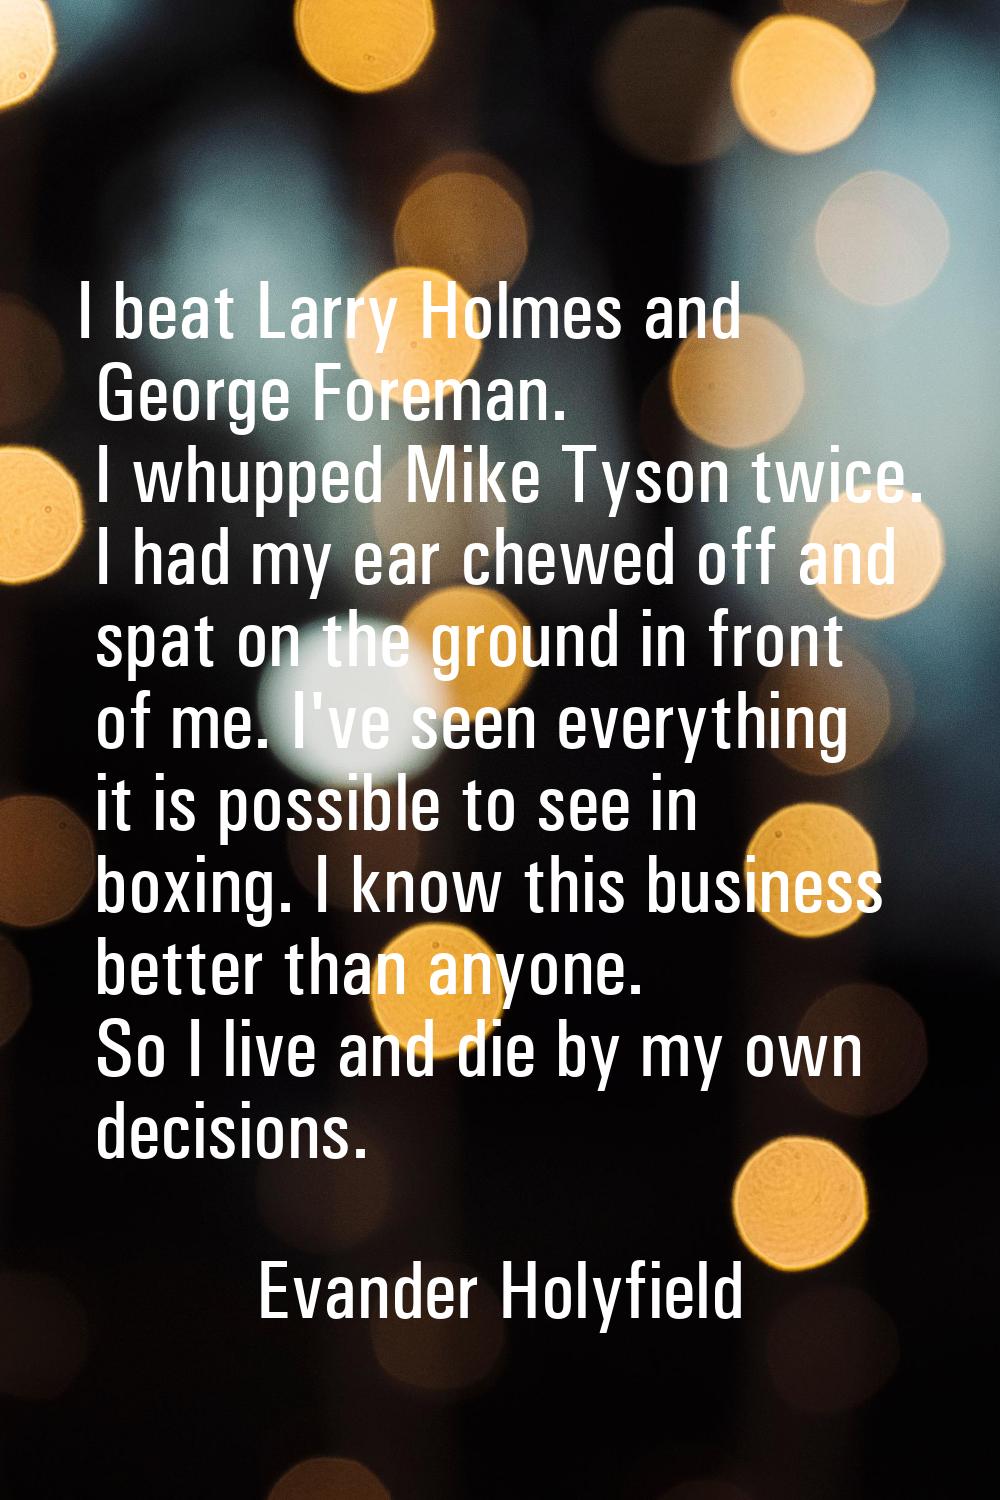 I beat Larry Holmes and George Foreman. I whupped Mike Tyson twice. I had my ear chewed off and spa